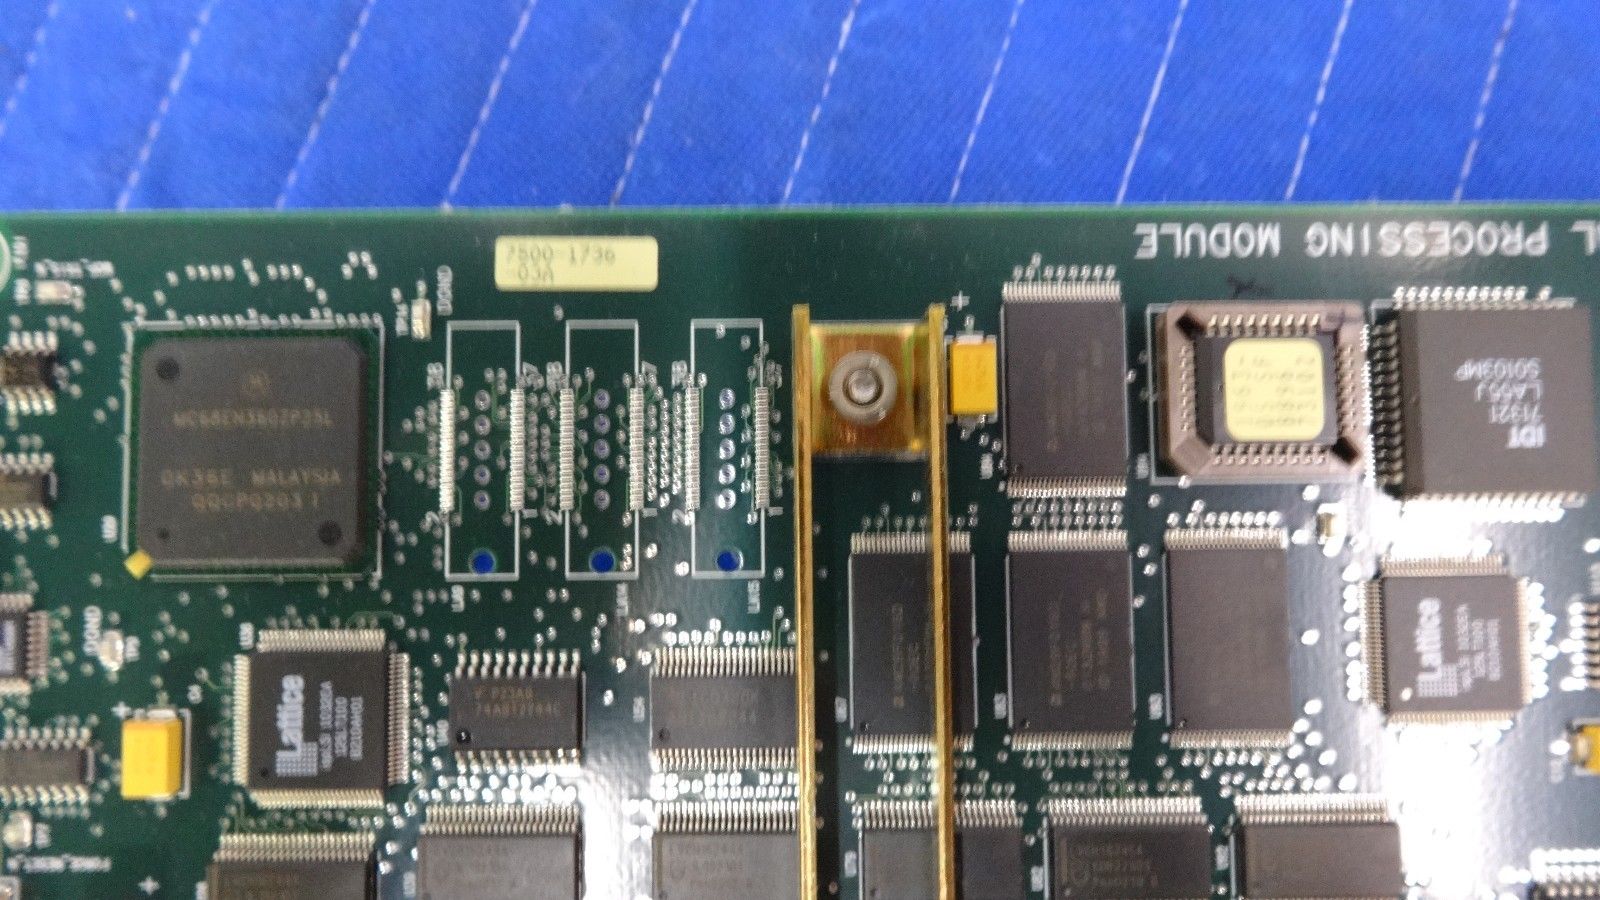 a close up of a motherboard with many chips